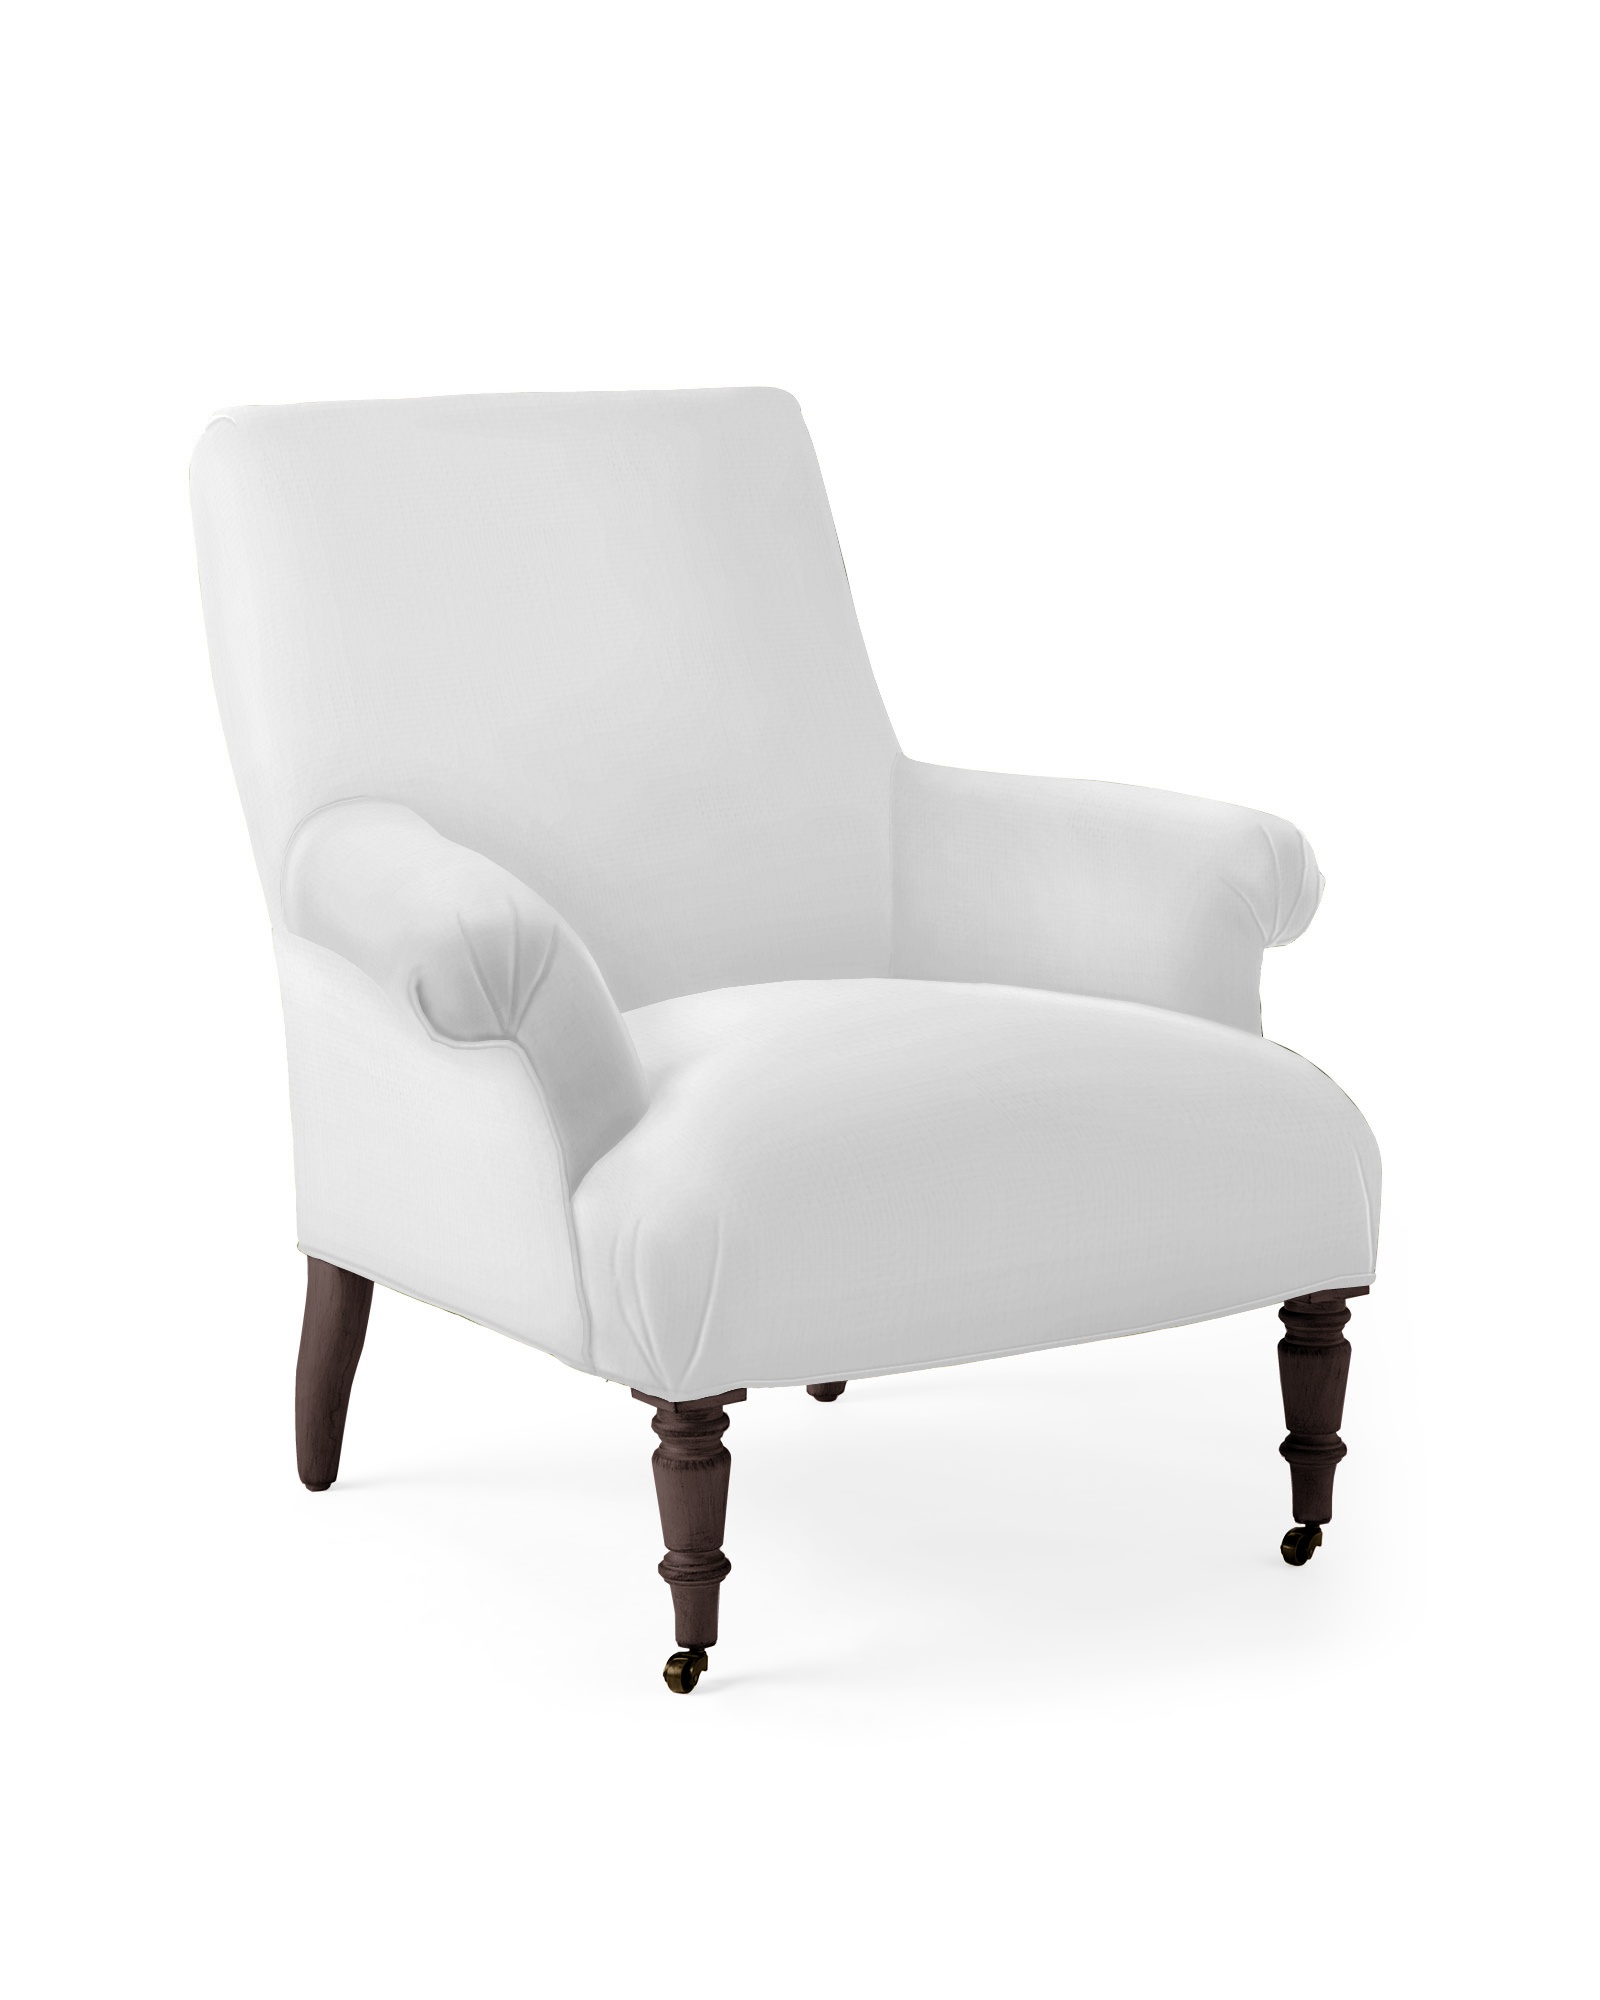 A serena and lily Avignon Chair